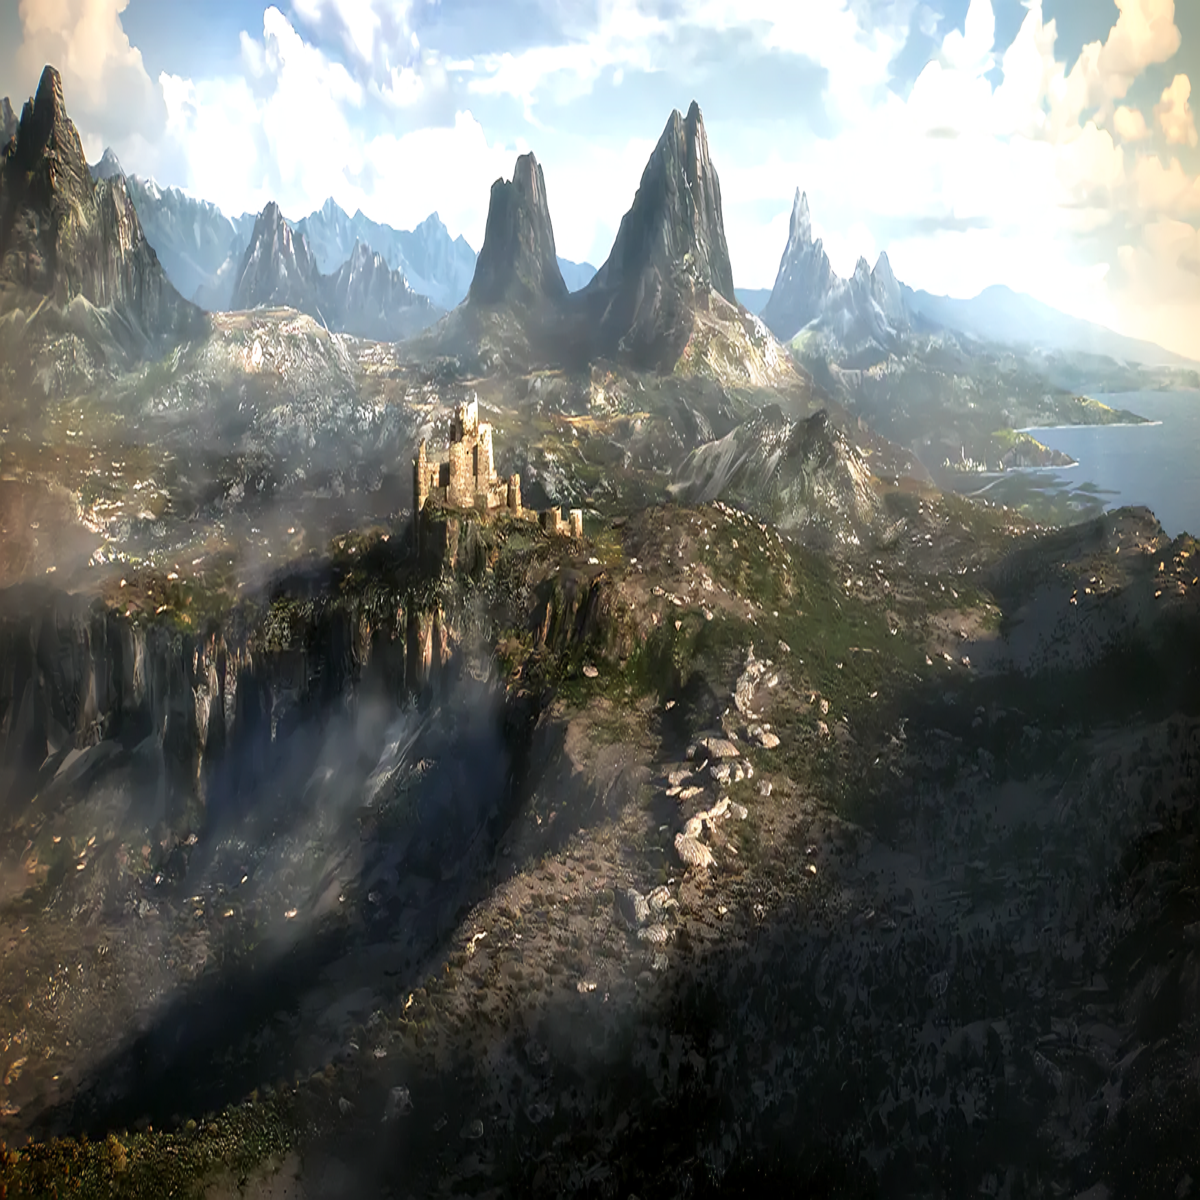 Is there a new Elder Scrolls 6 engine? Yes and no - it's not an